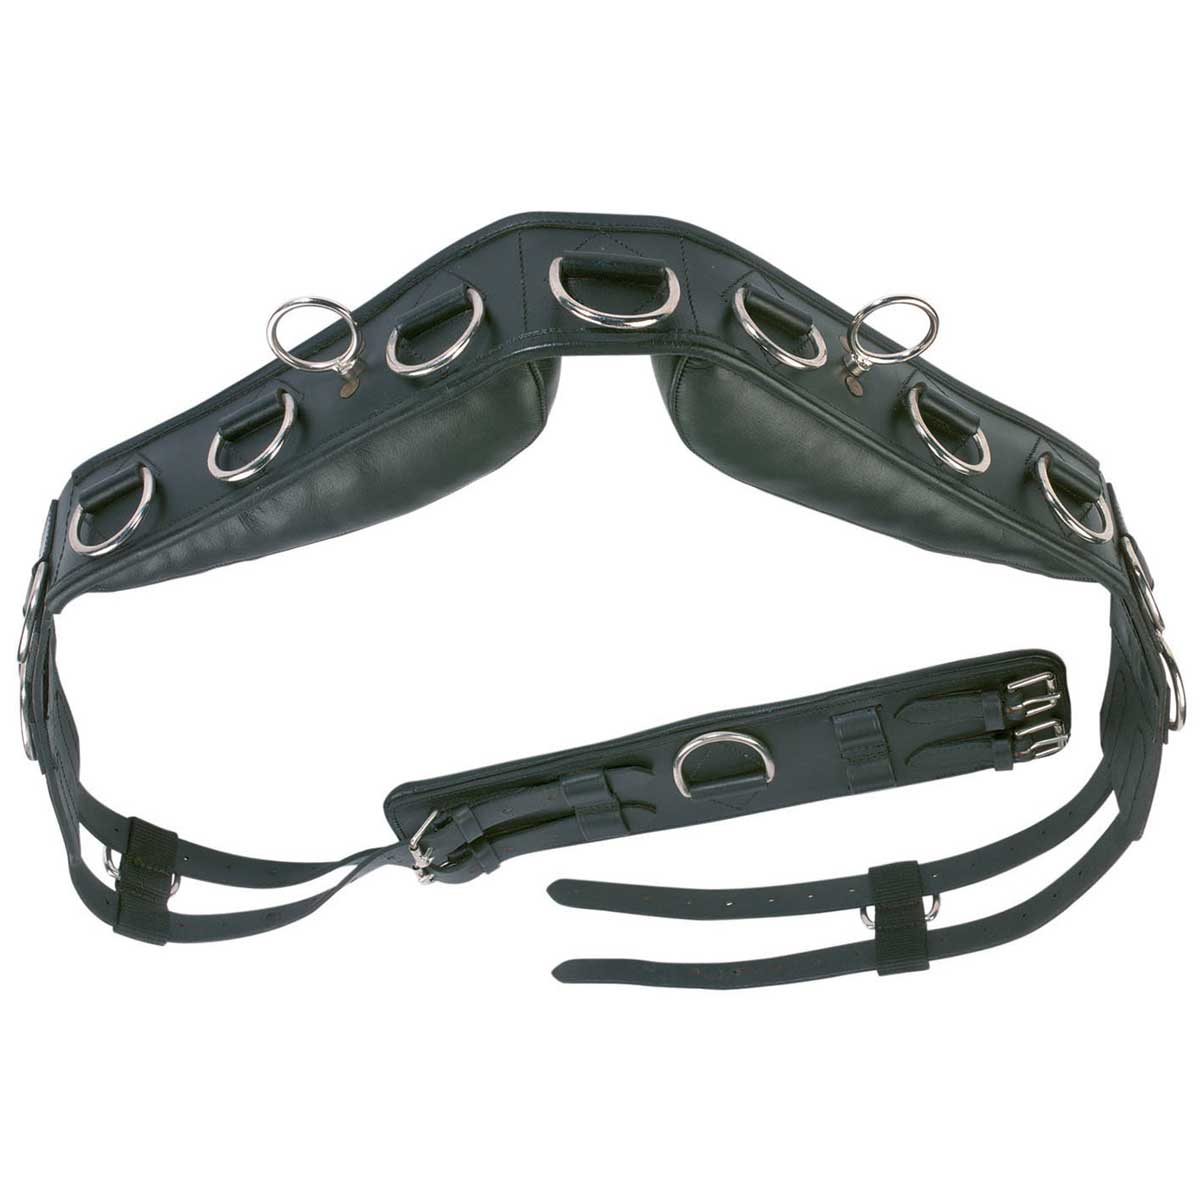 BUSSE Lunging Harness PROFESSIONAL LEATHER